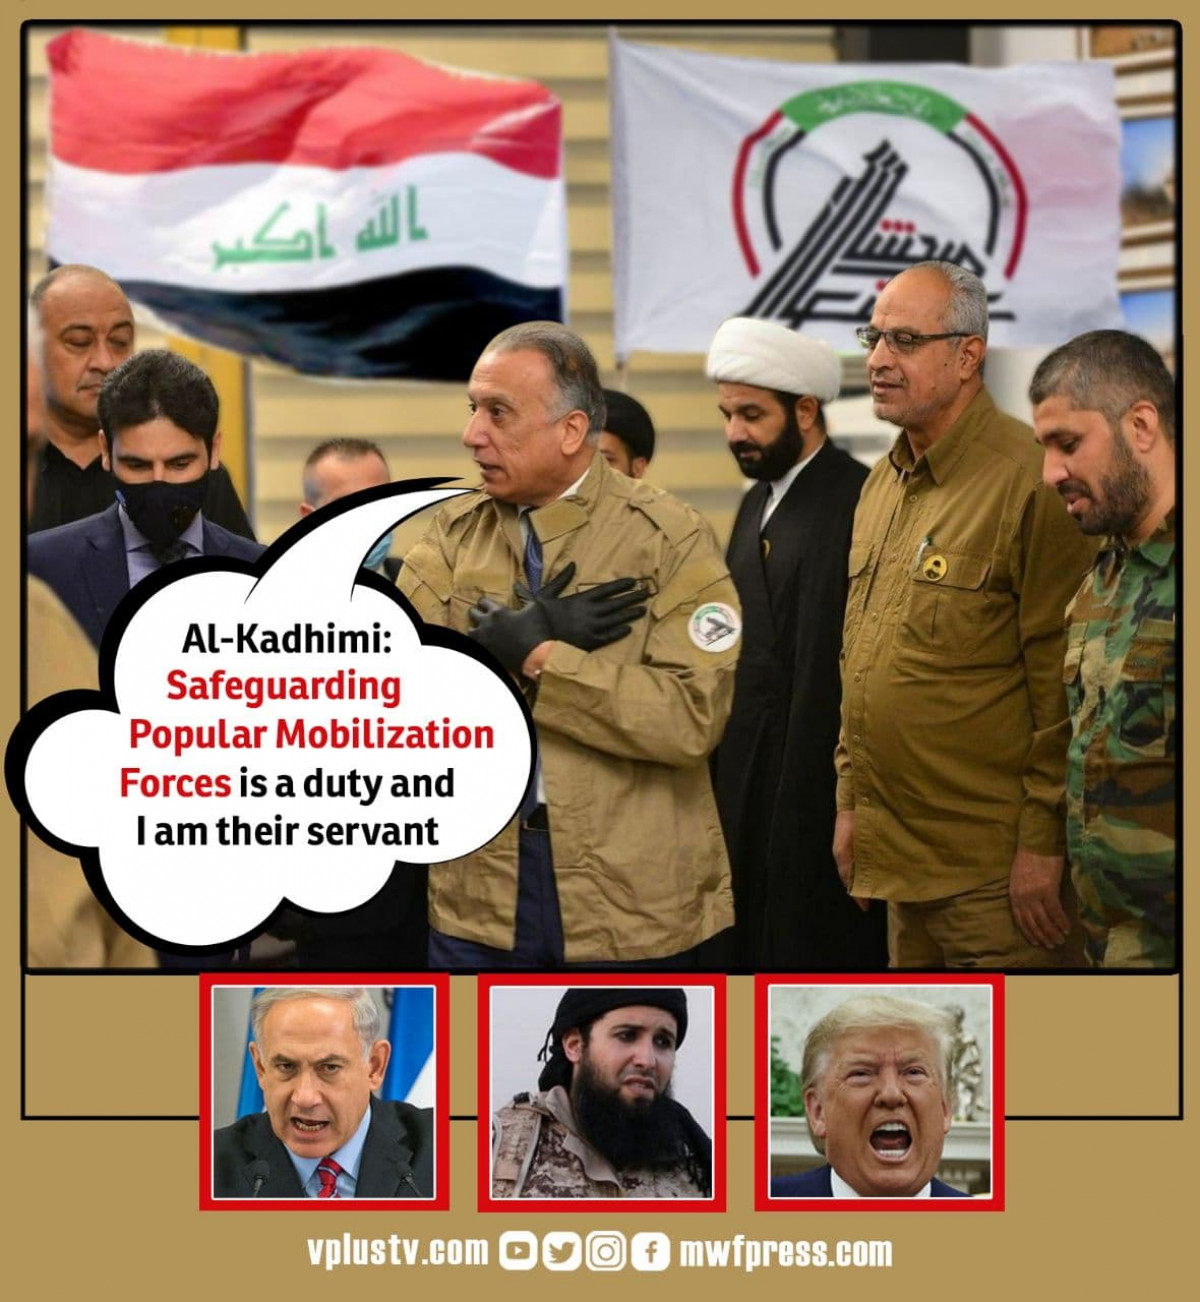 Al-Kadhimi: Safeguarding Popular Mobilization Forces is a duty and I am their servant